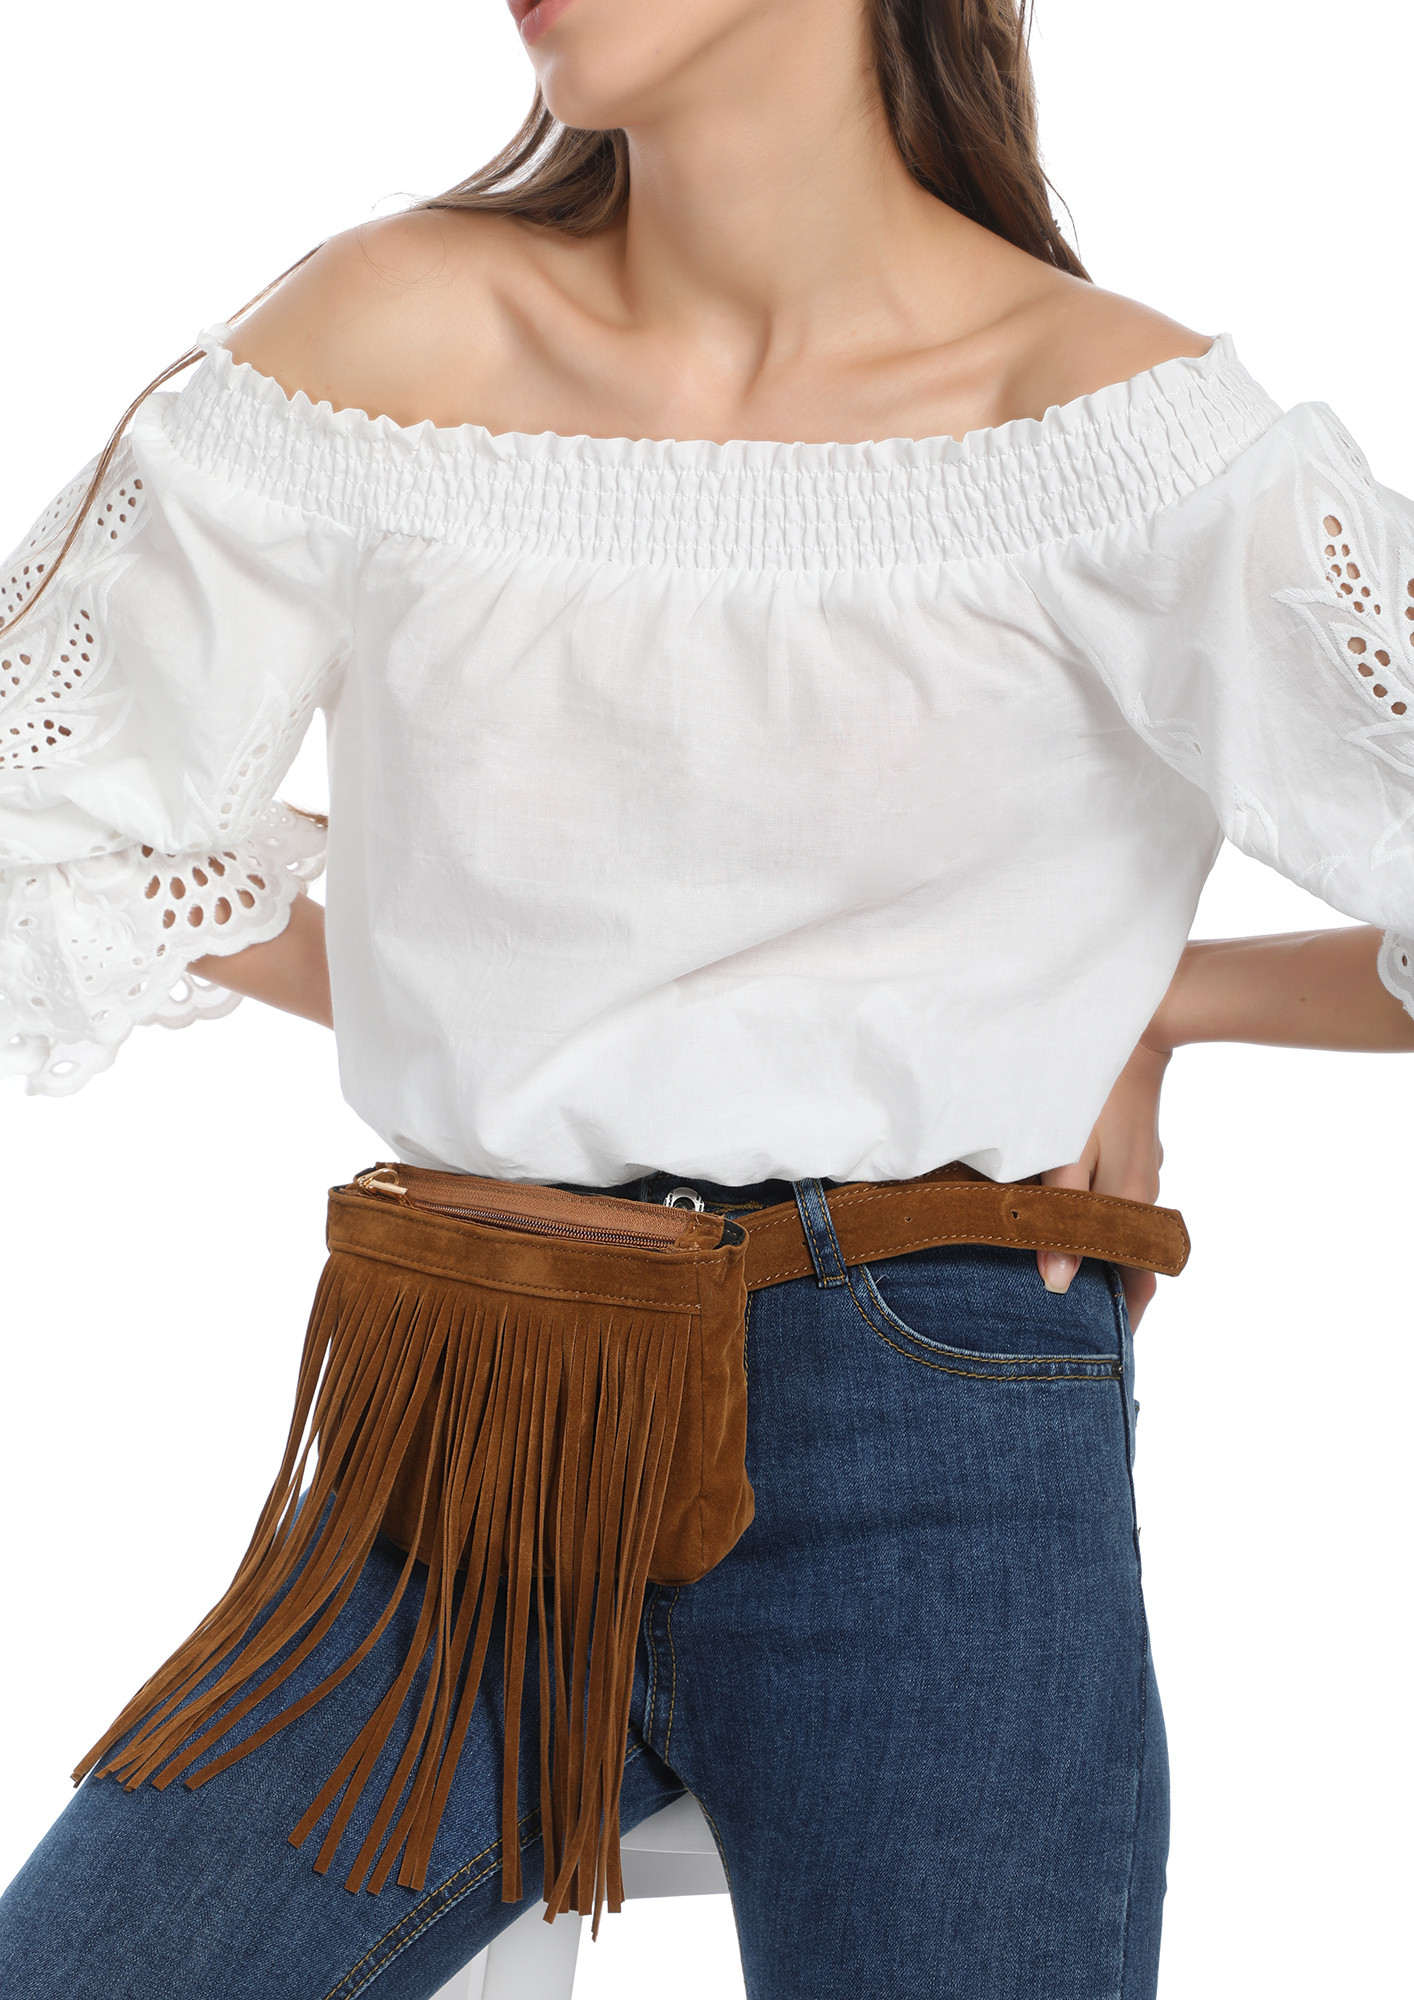 ALL FRINGED FOR YOU BROWN WAIST PURSE